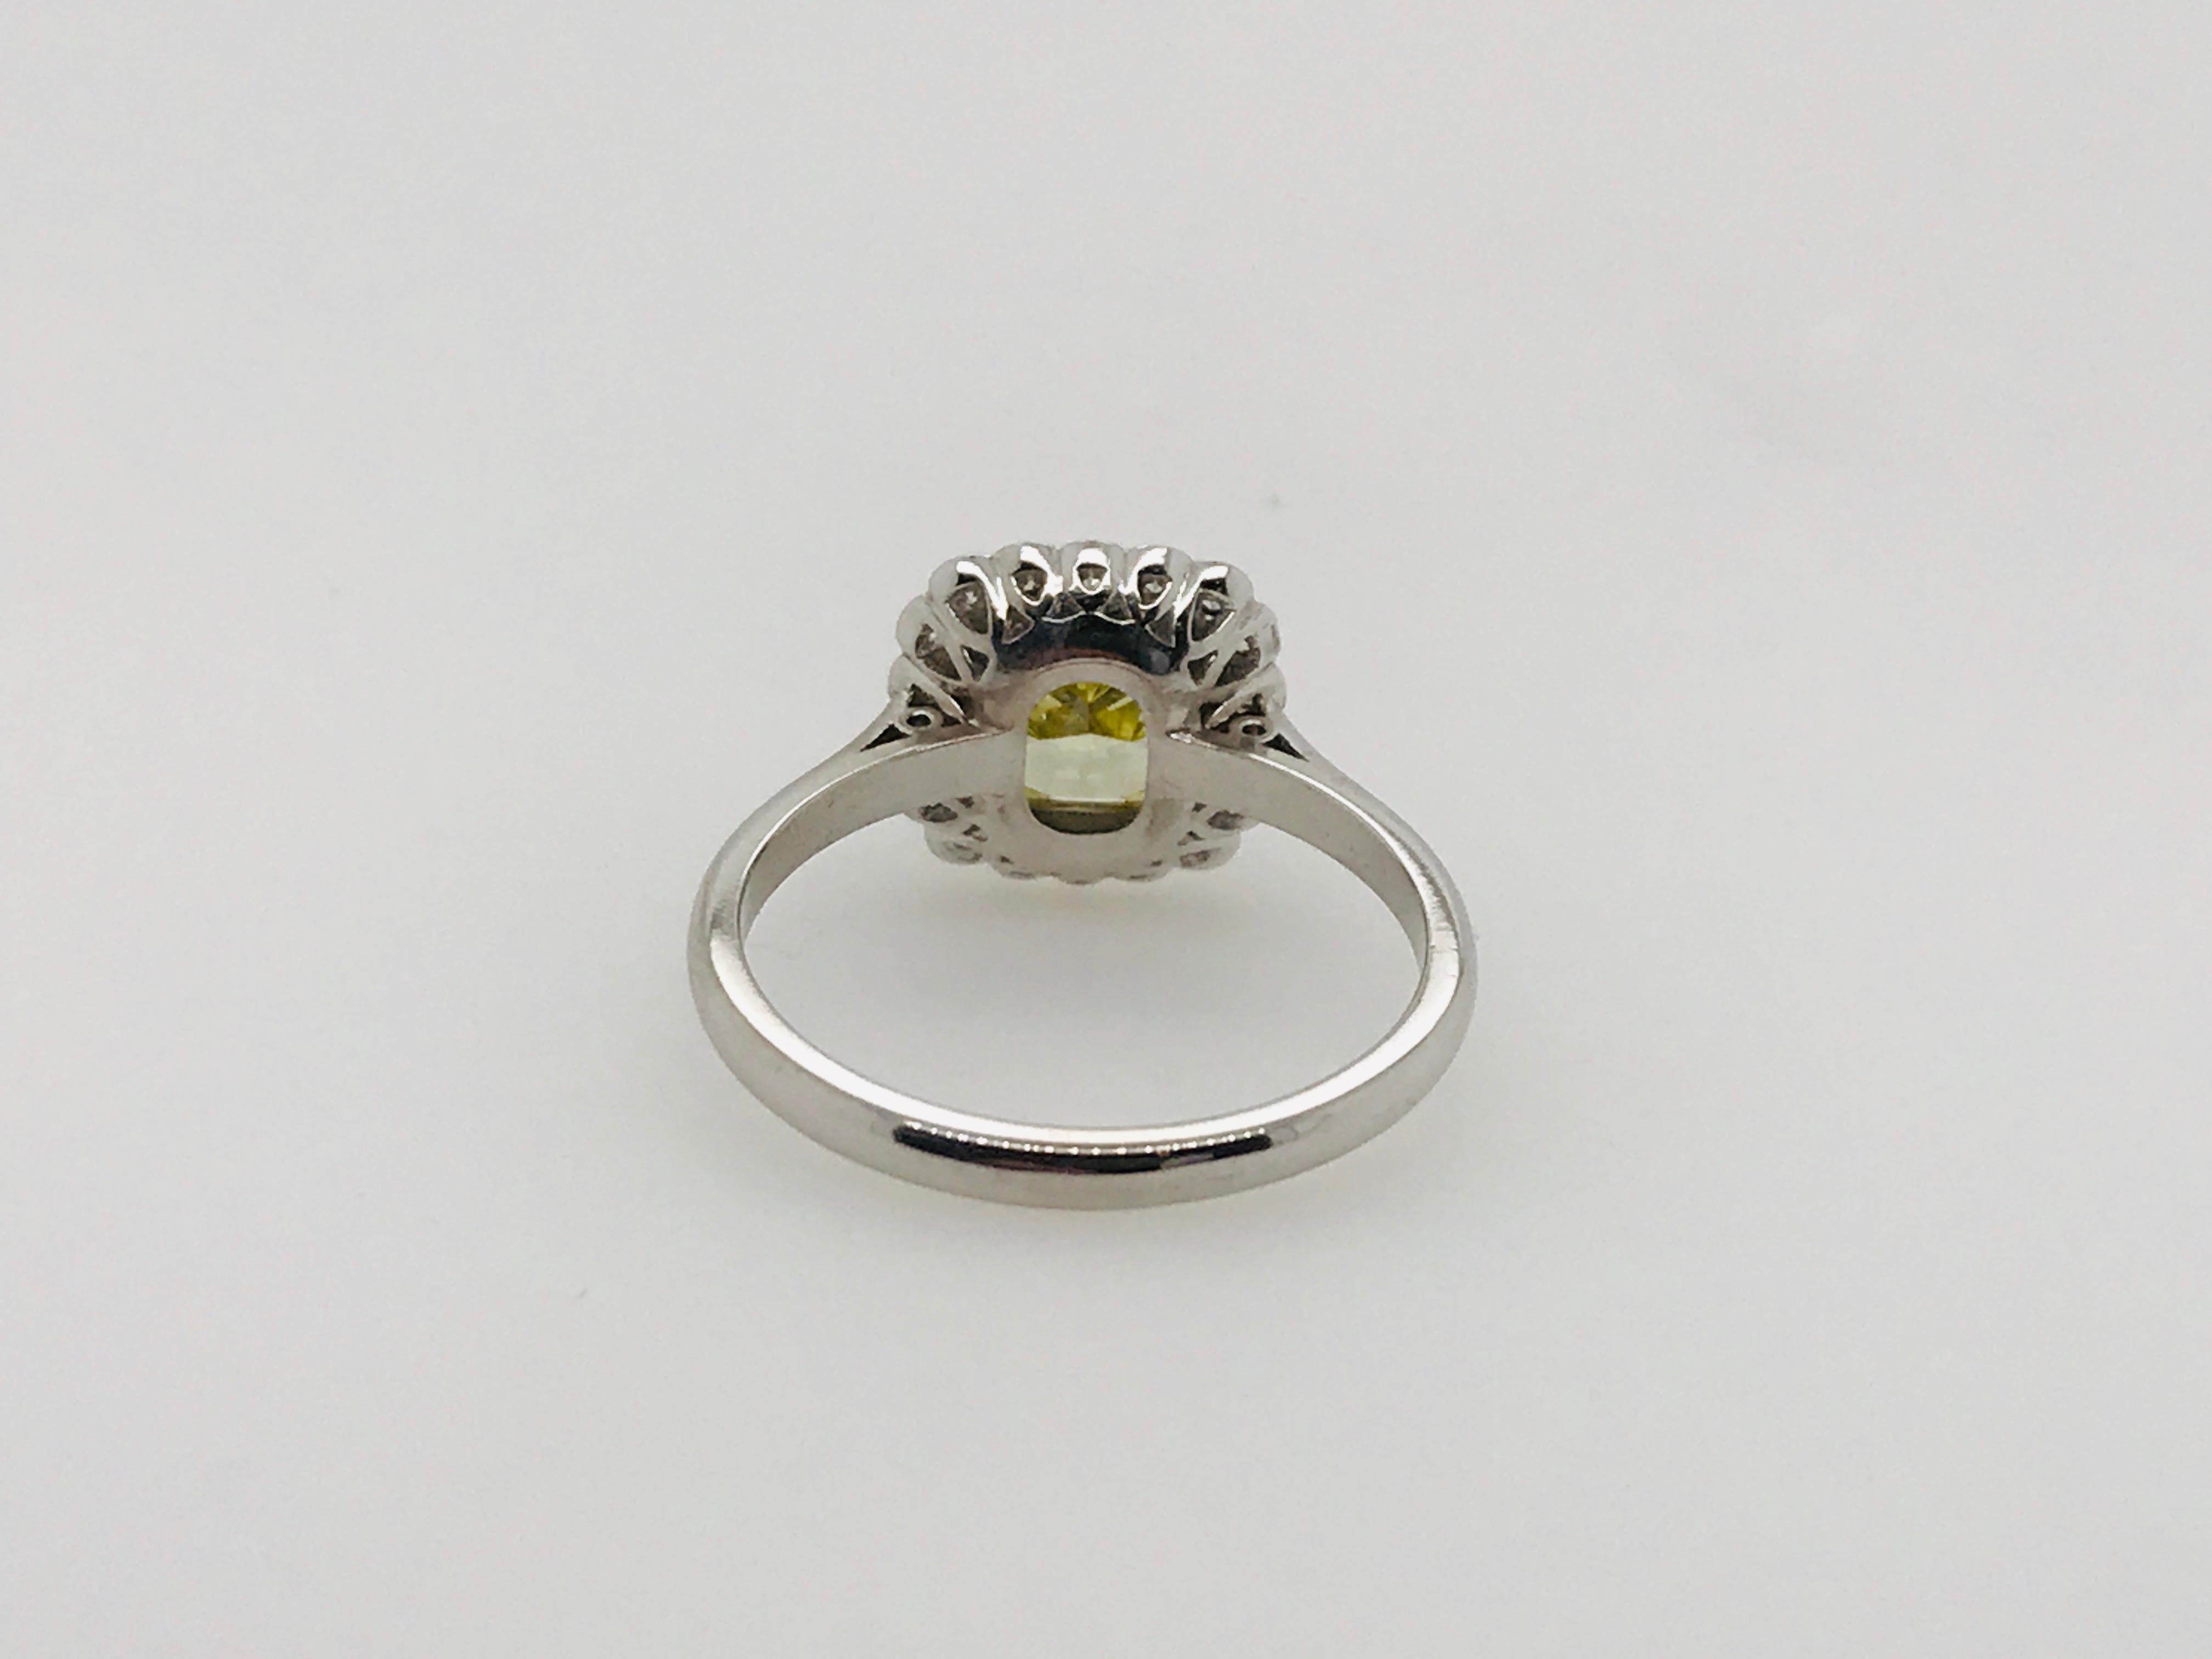 Handmade scalloped cluster ring in 18ct white gold 
centre diamond 2.18ct FIY VS1
18 brilliant cut diamonds totalling 0.25ct GVS
finger size M - can be resized